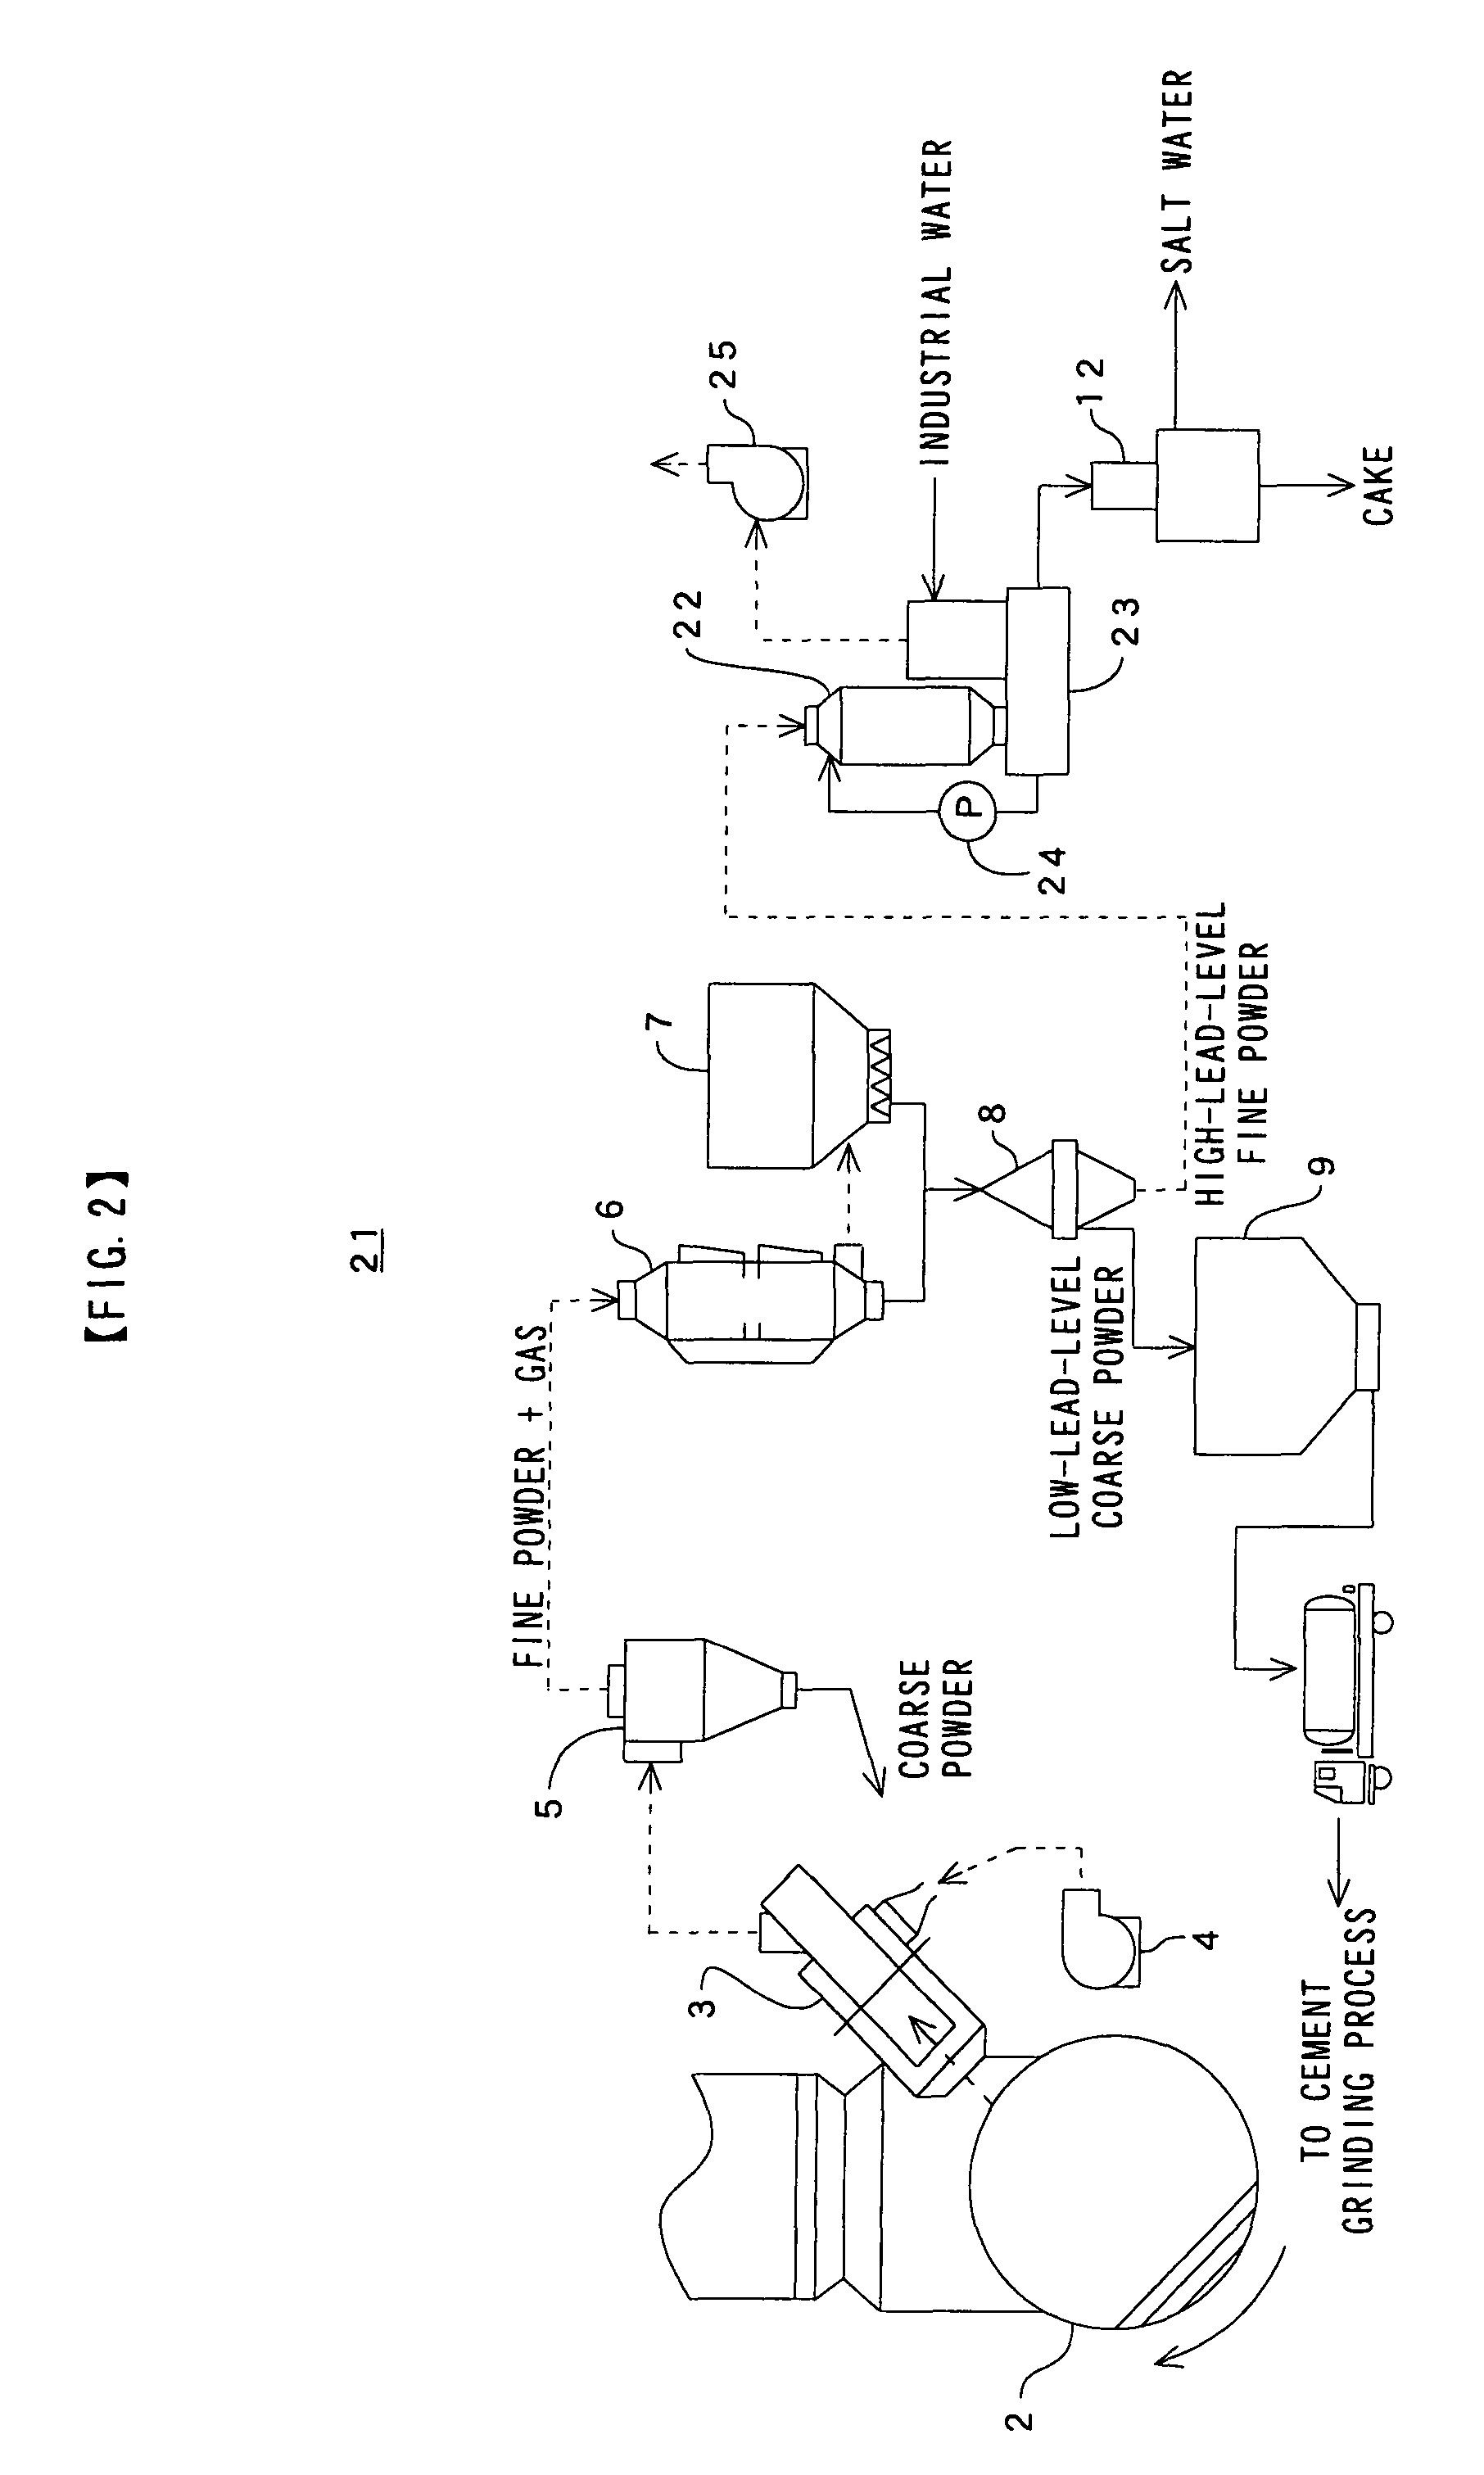 System and method for treating dust contained in extracted cement kiln combustion gas